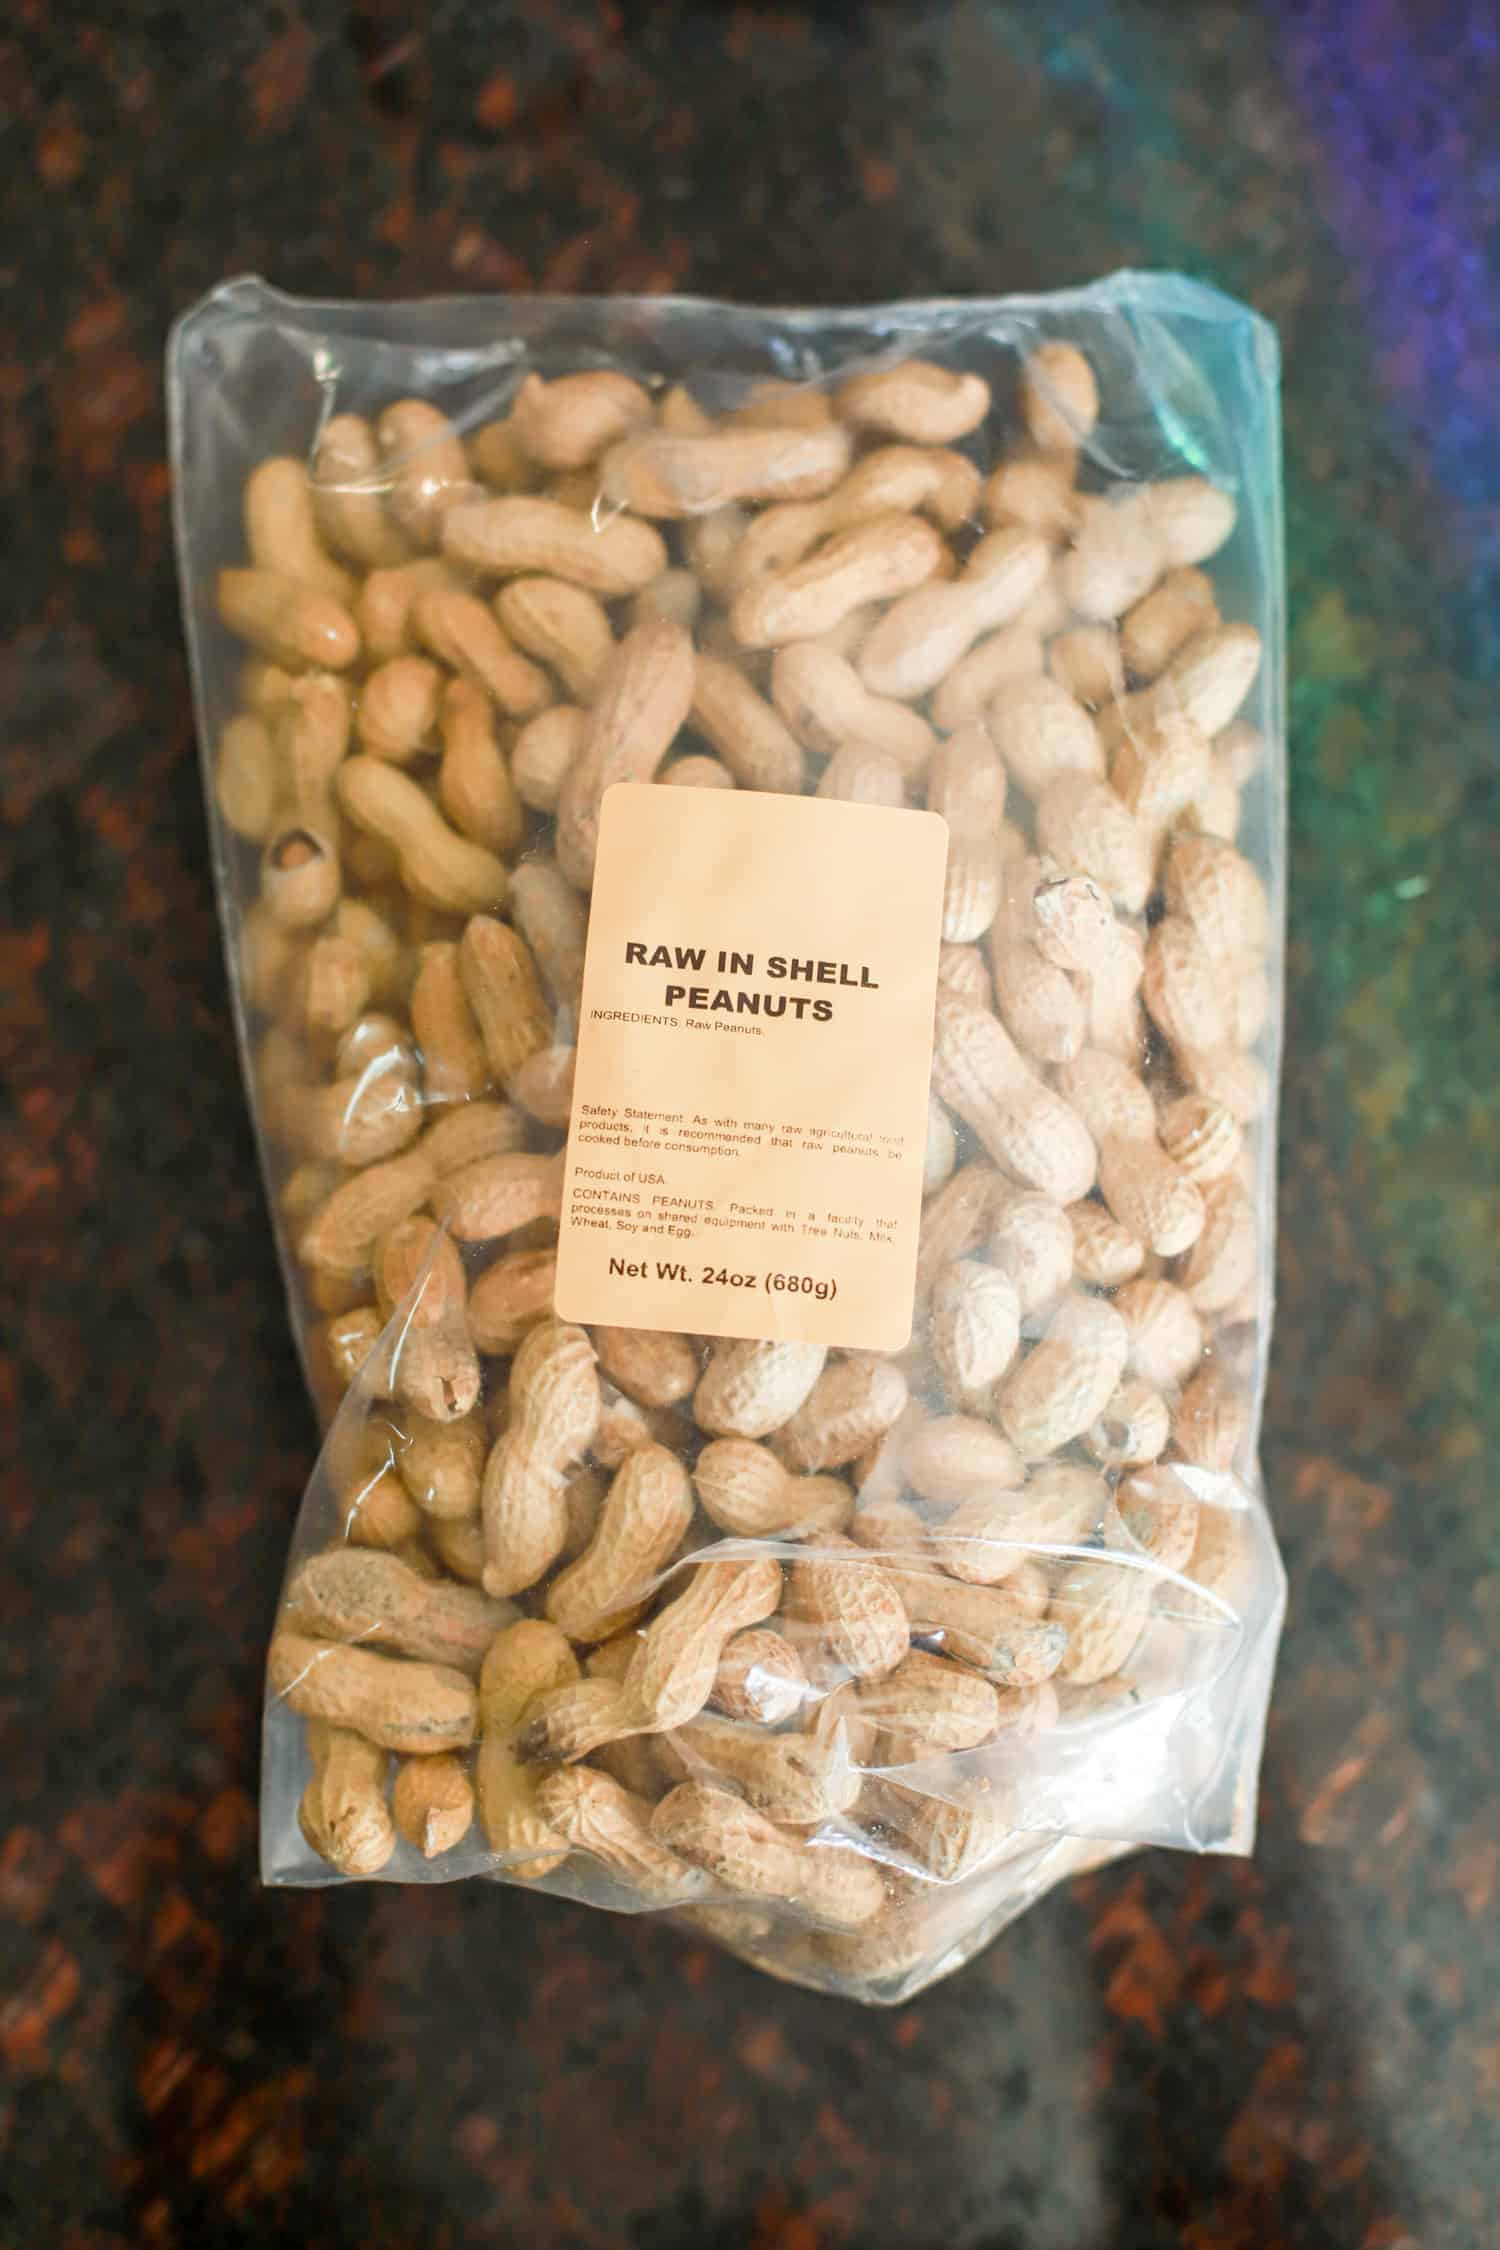 Large clear bag of raw peanuts in their shells.